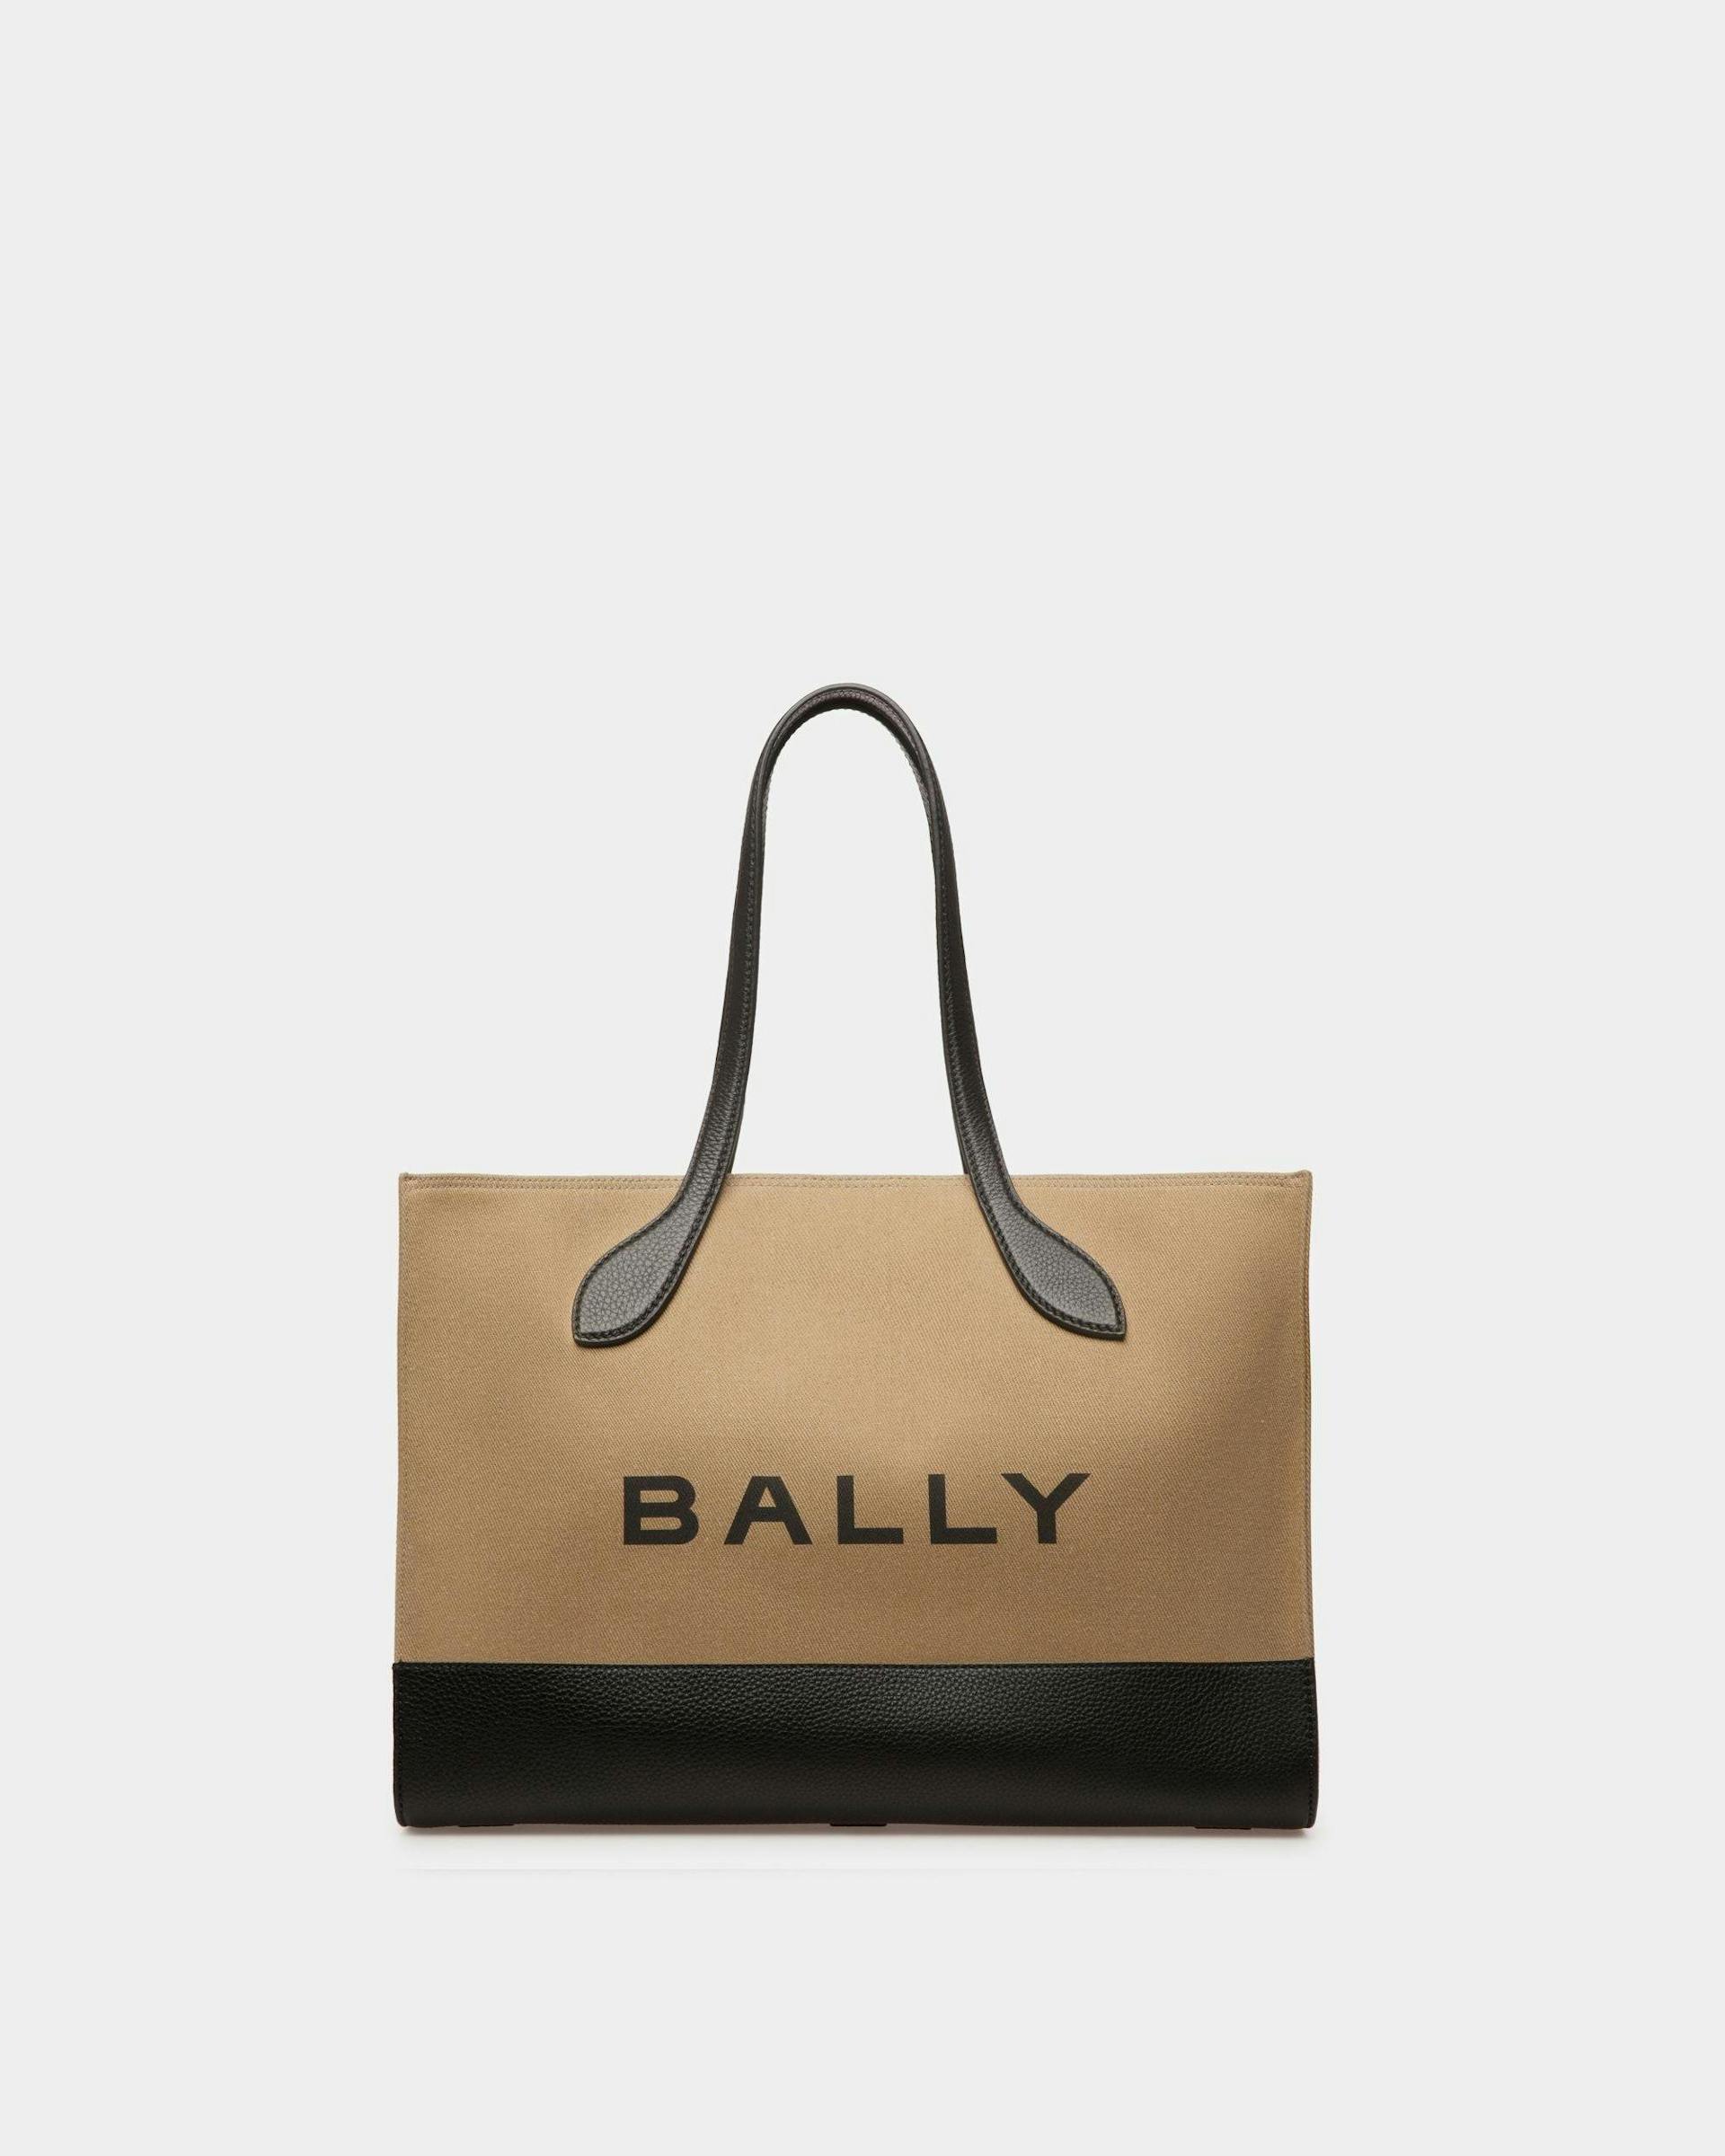 Women's Bar Tote Bag In Sand And Black Fabric | Bally | Still Life Front